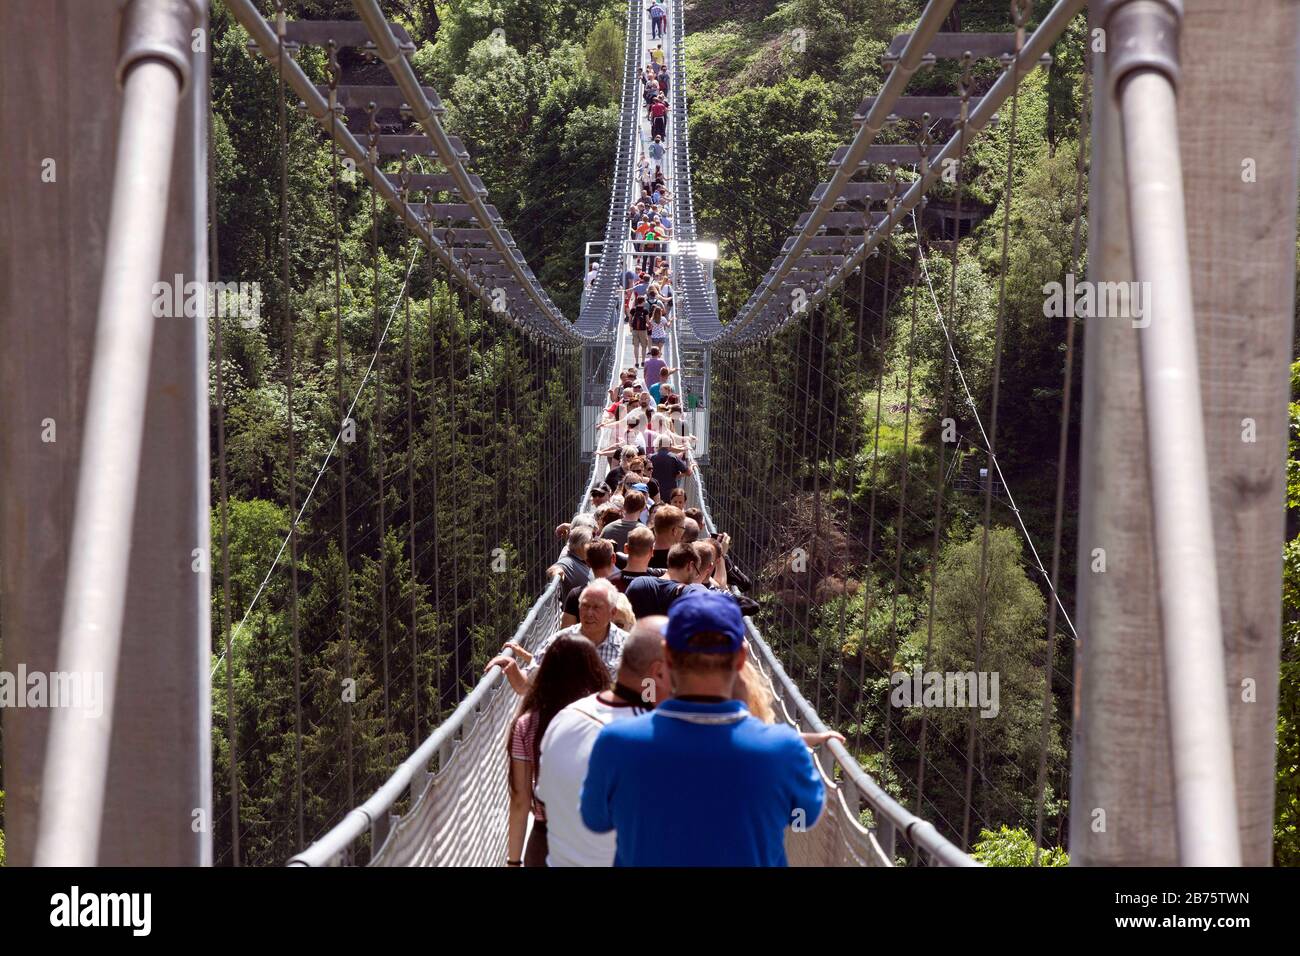 On 11.06.2017 visitors will walk over the rope suspension bridge at the Rappbode dam, 483 metres long, 100 metres above the valley floor. [automated translation] Stock Photo